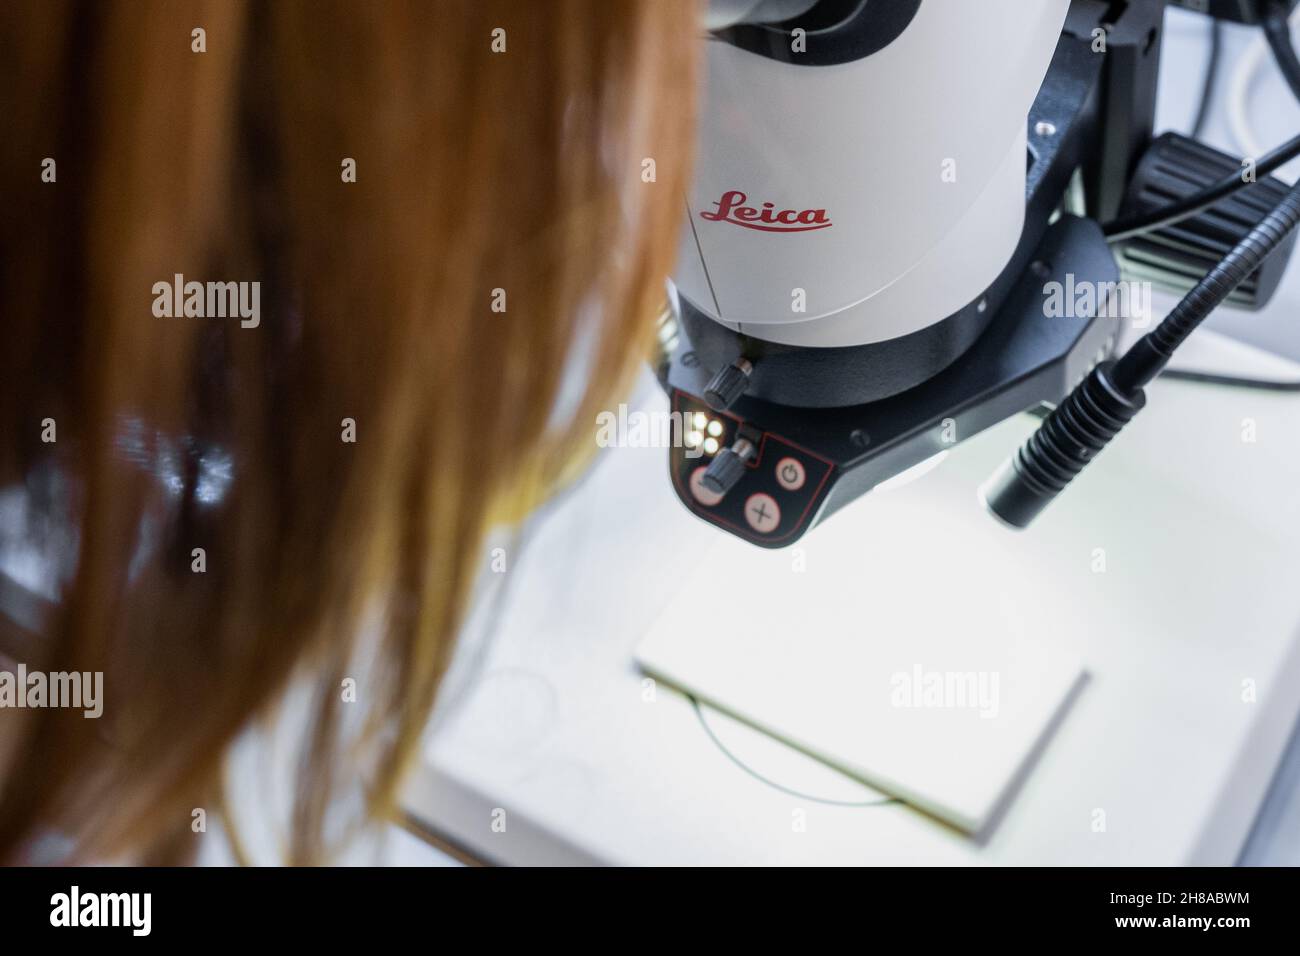 Scientist uses Leica microscope for biochemical or cell biology analysis, November 2021, San Francisco, USA. Stock Photo